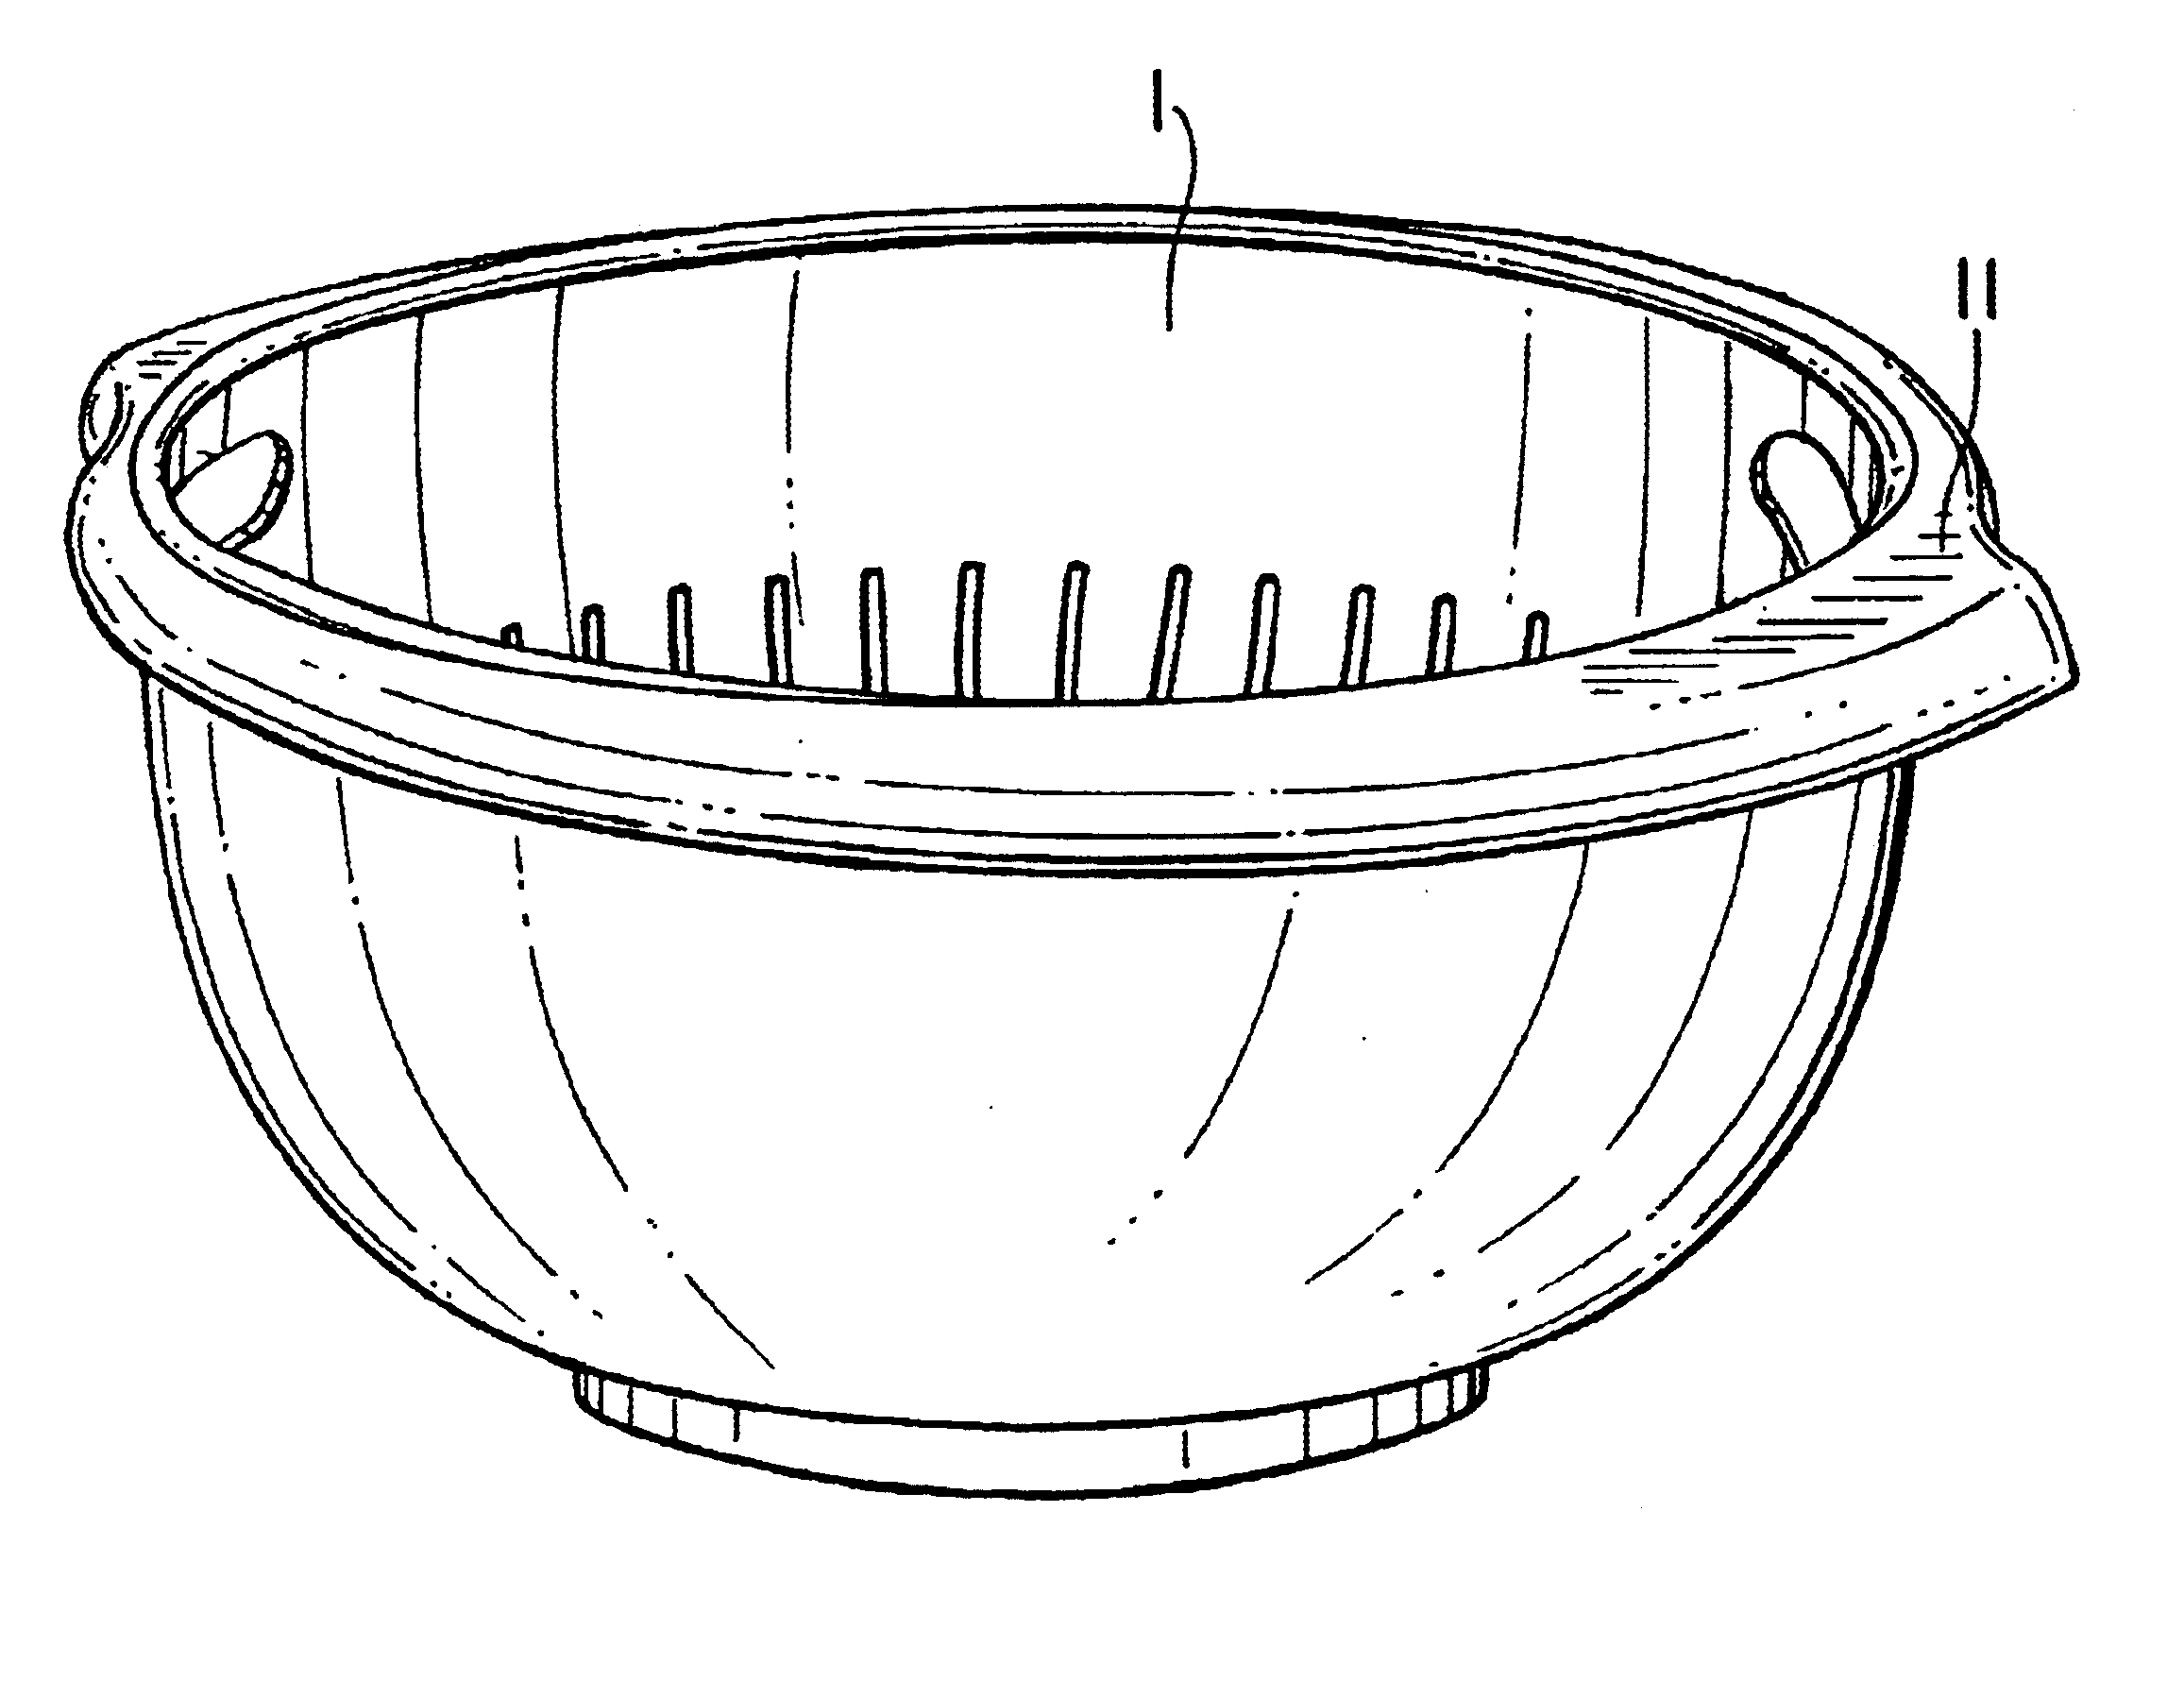 Device combining 3 functions in one for washing, serving and storing berries, grapes, and other fruits